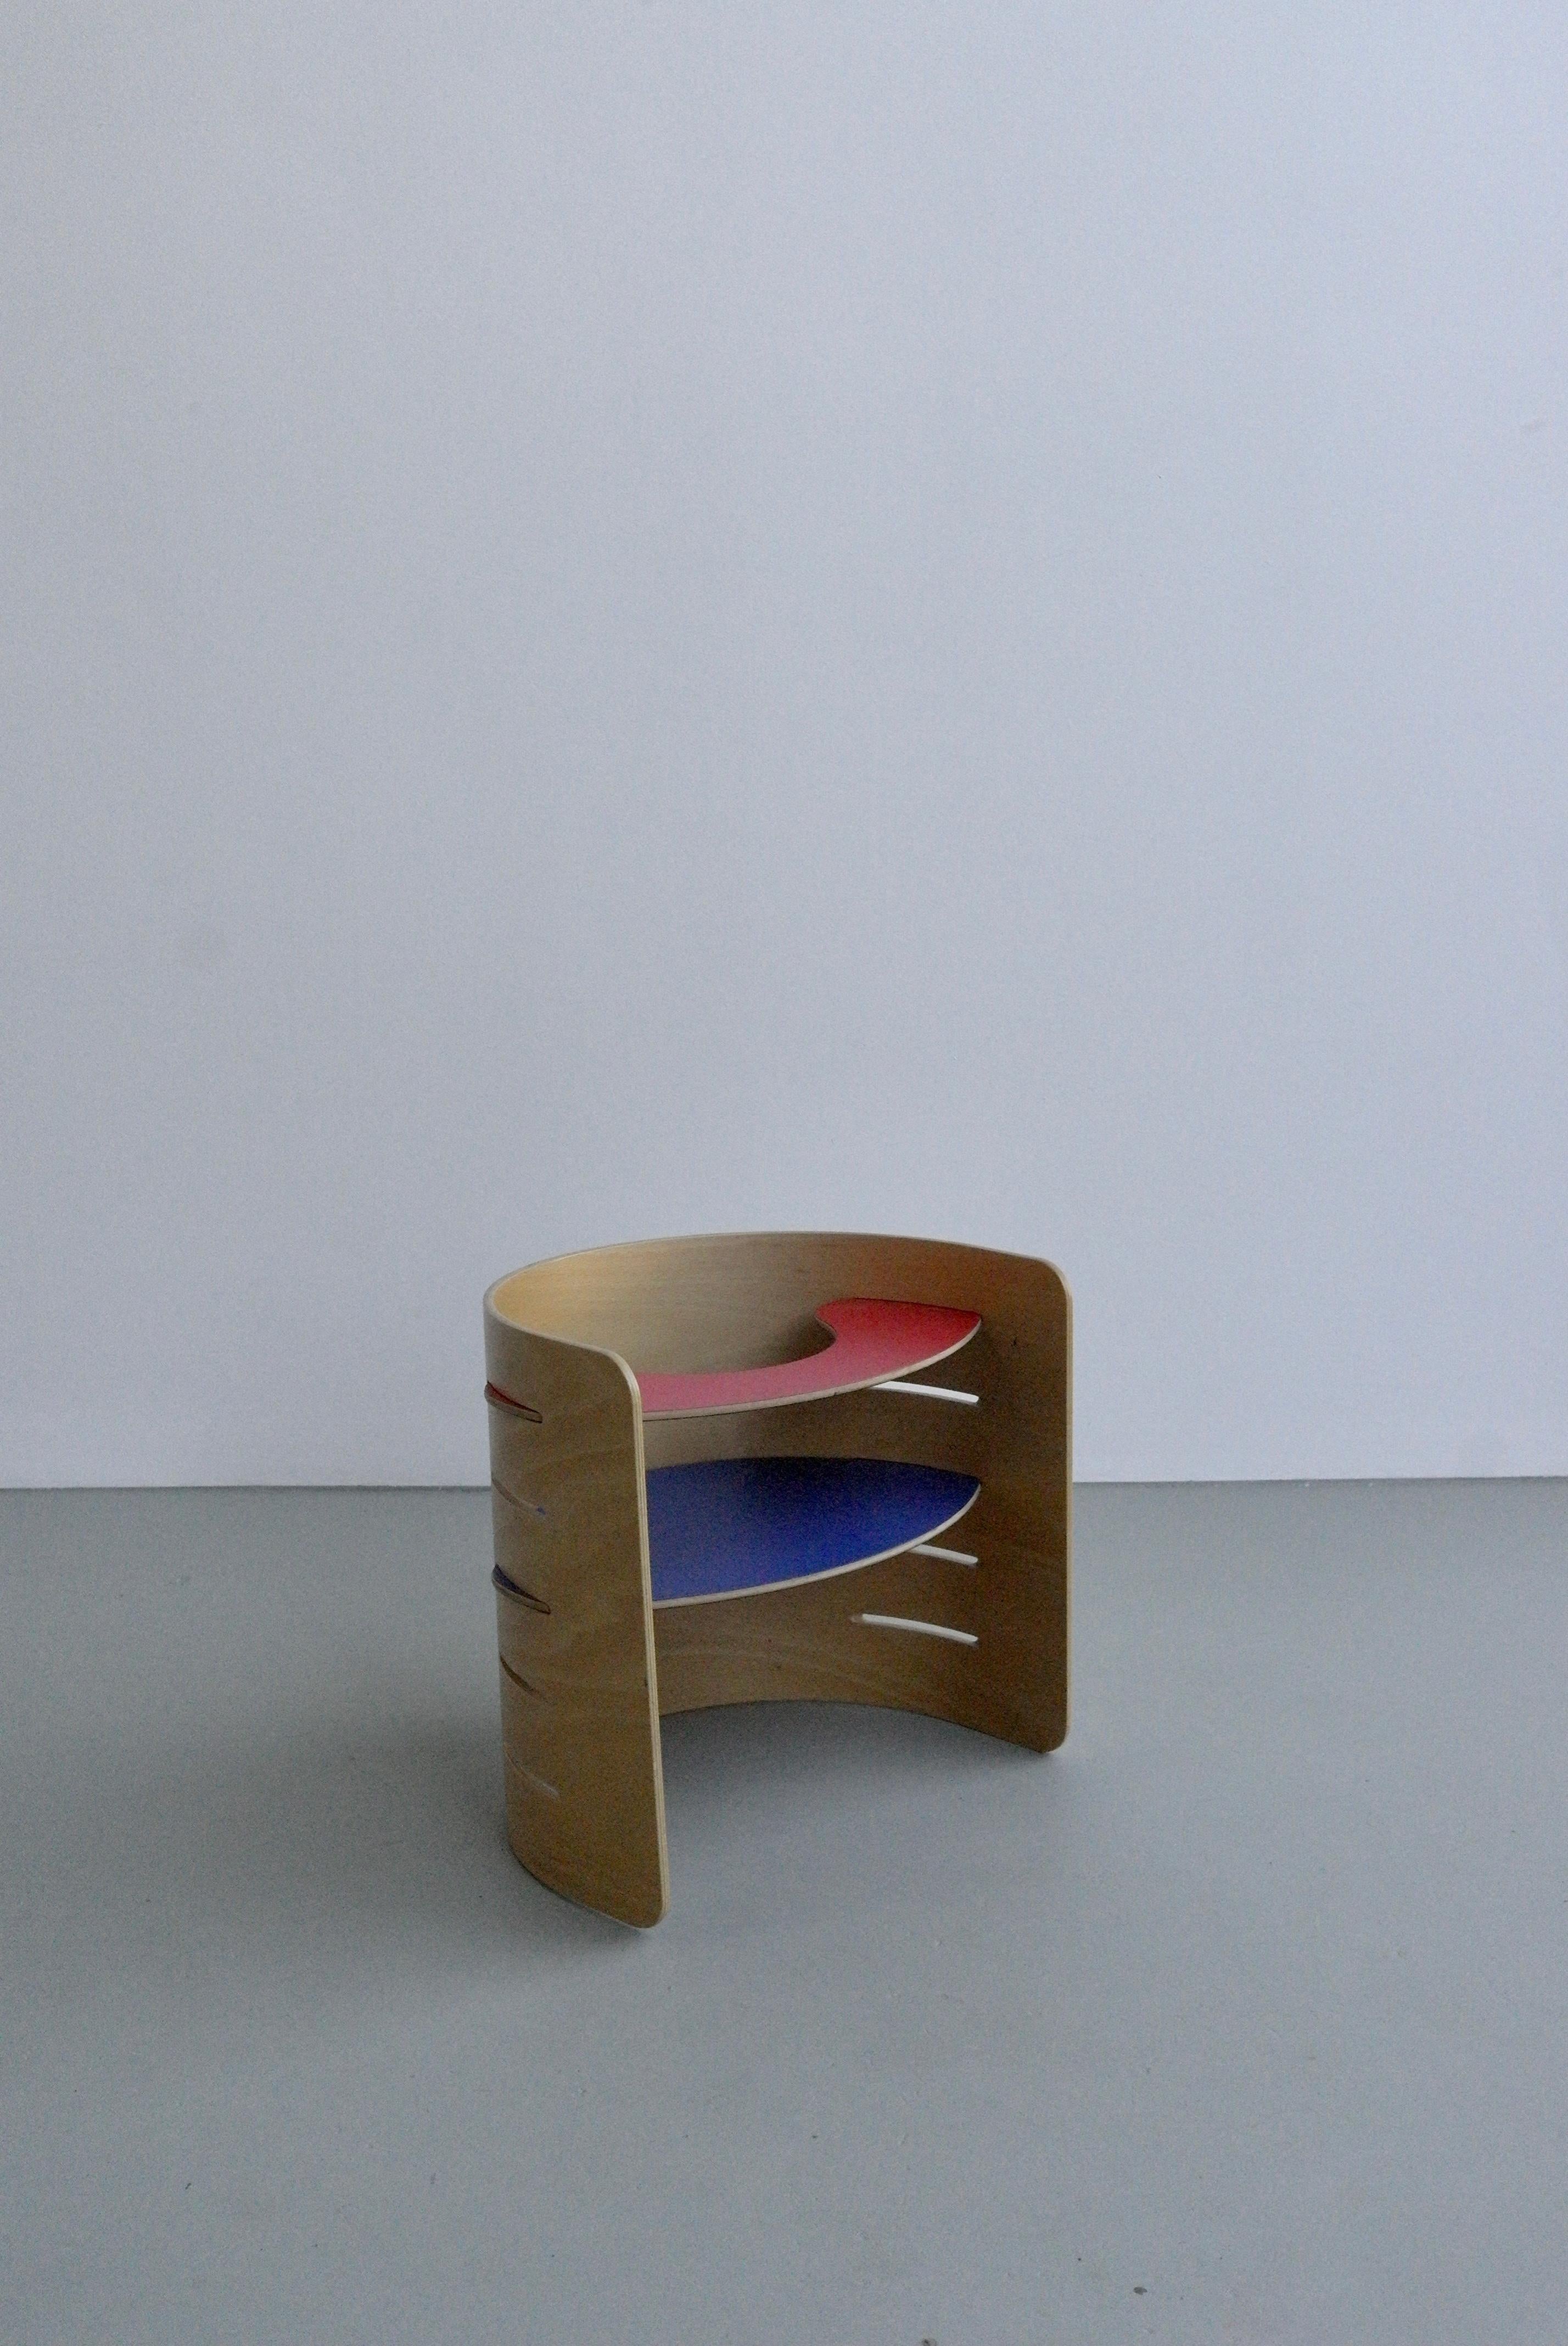 Red and blue child's chair by Architect Kristian Vedel, designed in Denmark, 1952
Kristian Vedel was one of the first to take the design of furniture for children seriously. The result is a functional, modern looking chair taking into account the